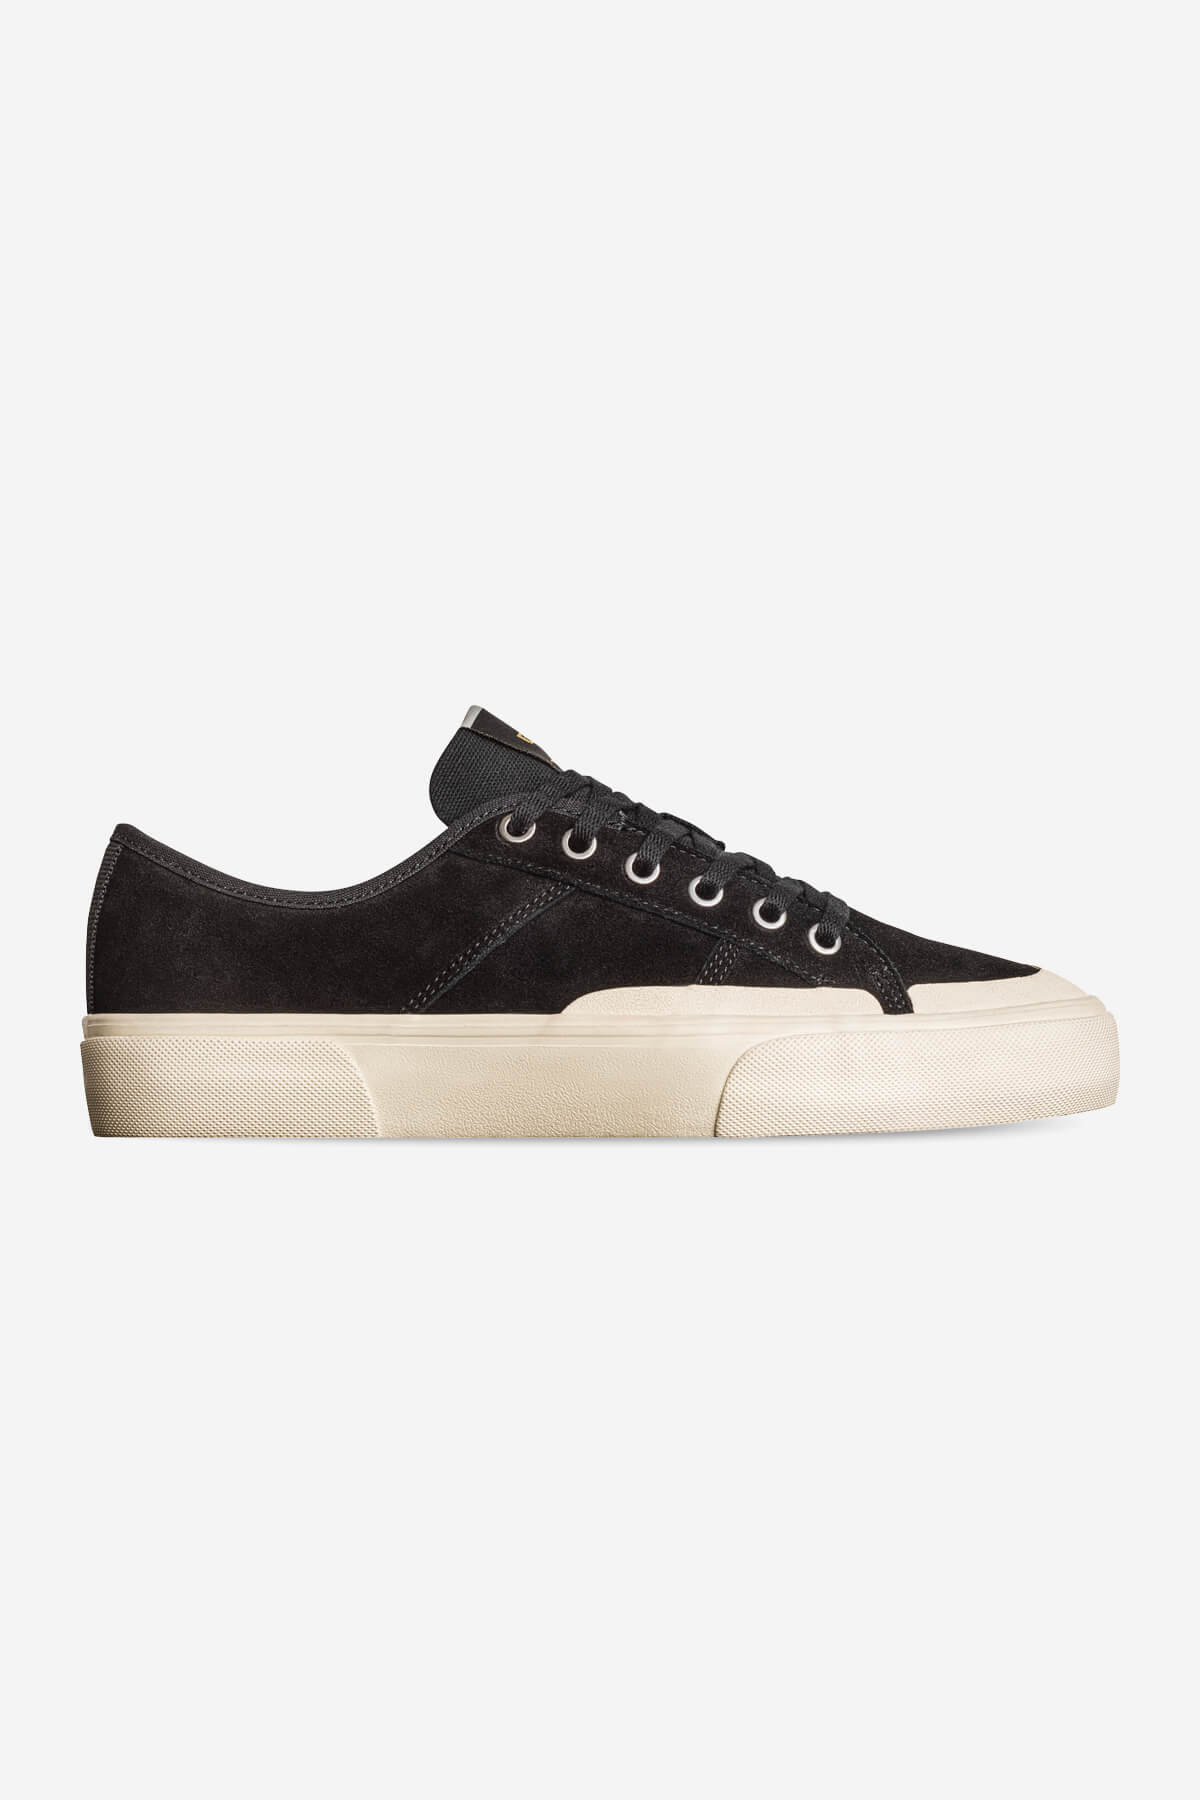 Globe Low shoes Surplus skate shoes in Black/Cream/Montano